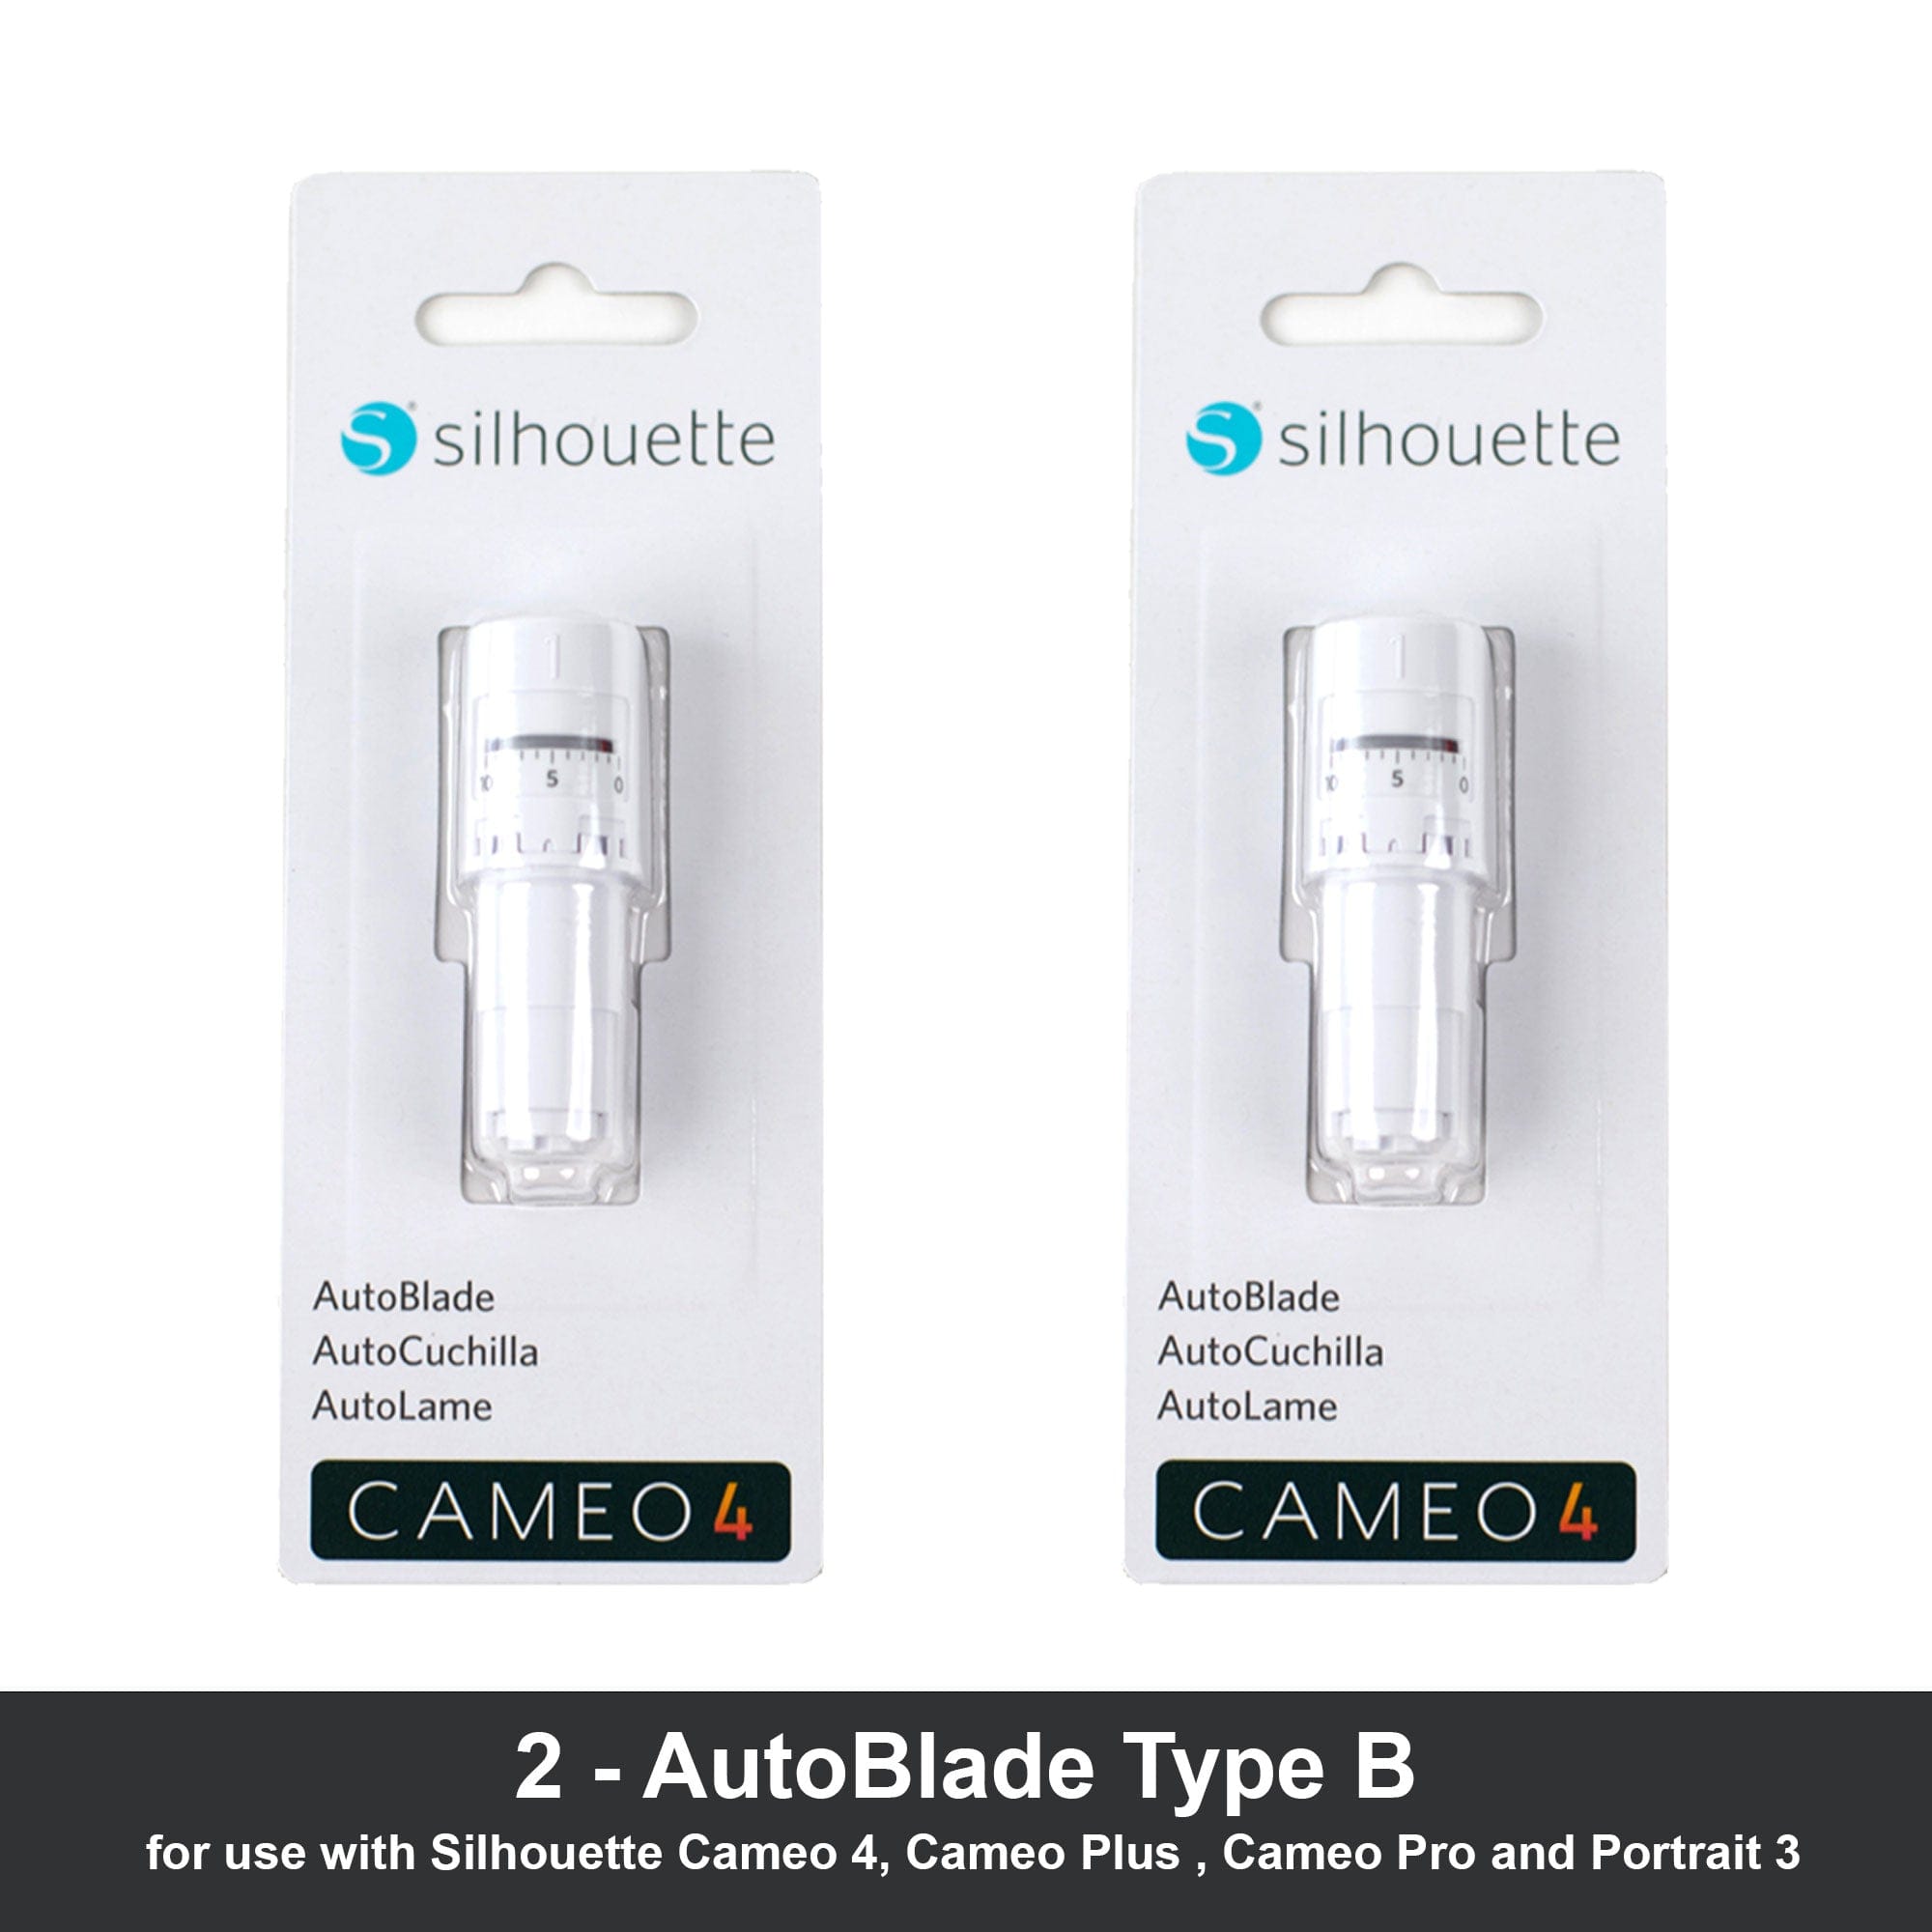 Brand new cameo 4 auto blade not cutting! : r/silhouettecutters